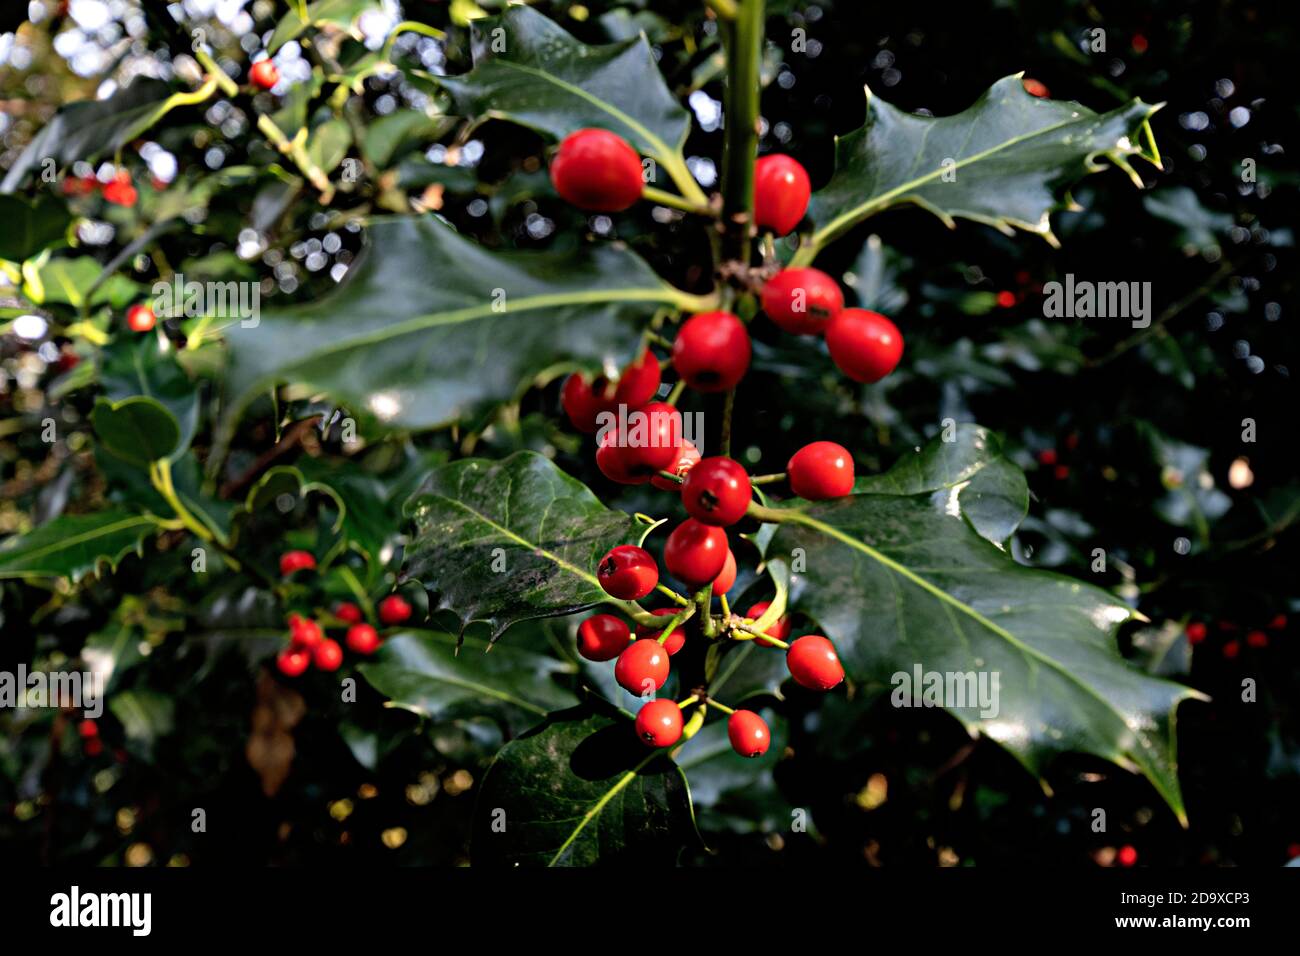 Holly berries on bushes(llex aquifolium)  are  traditionally seen as a sure sign that a bitterly cold winter lies ahead - West Berkshire England, UK Stock Photo